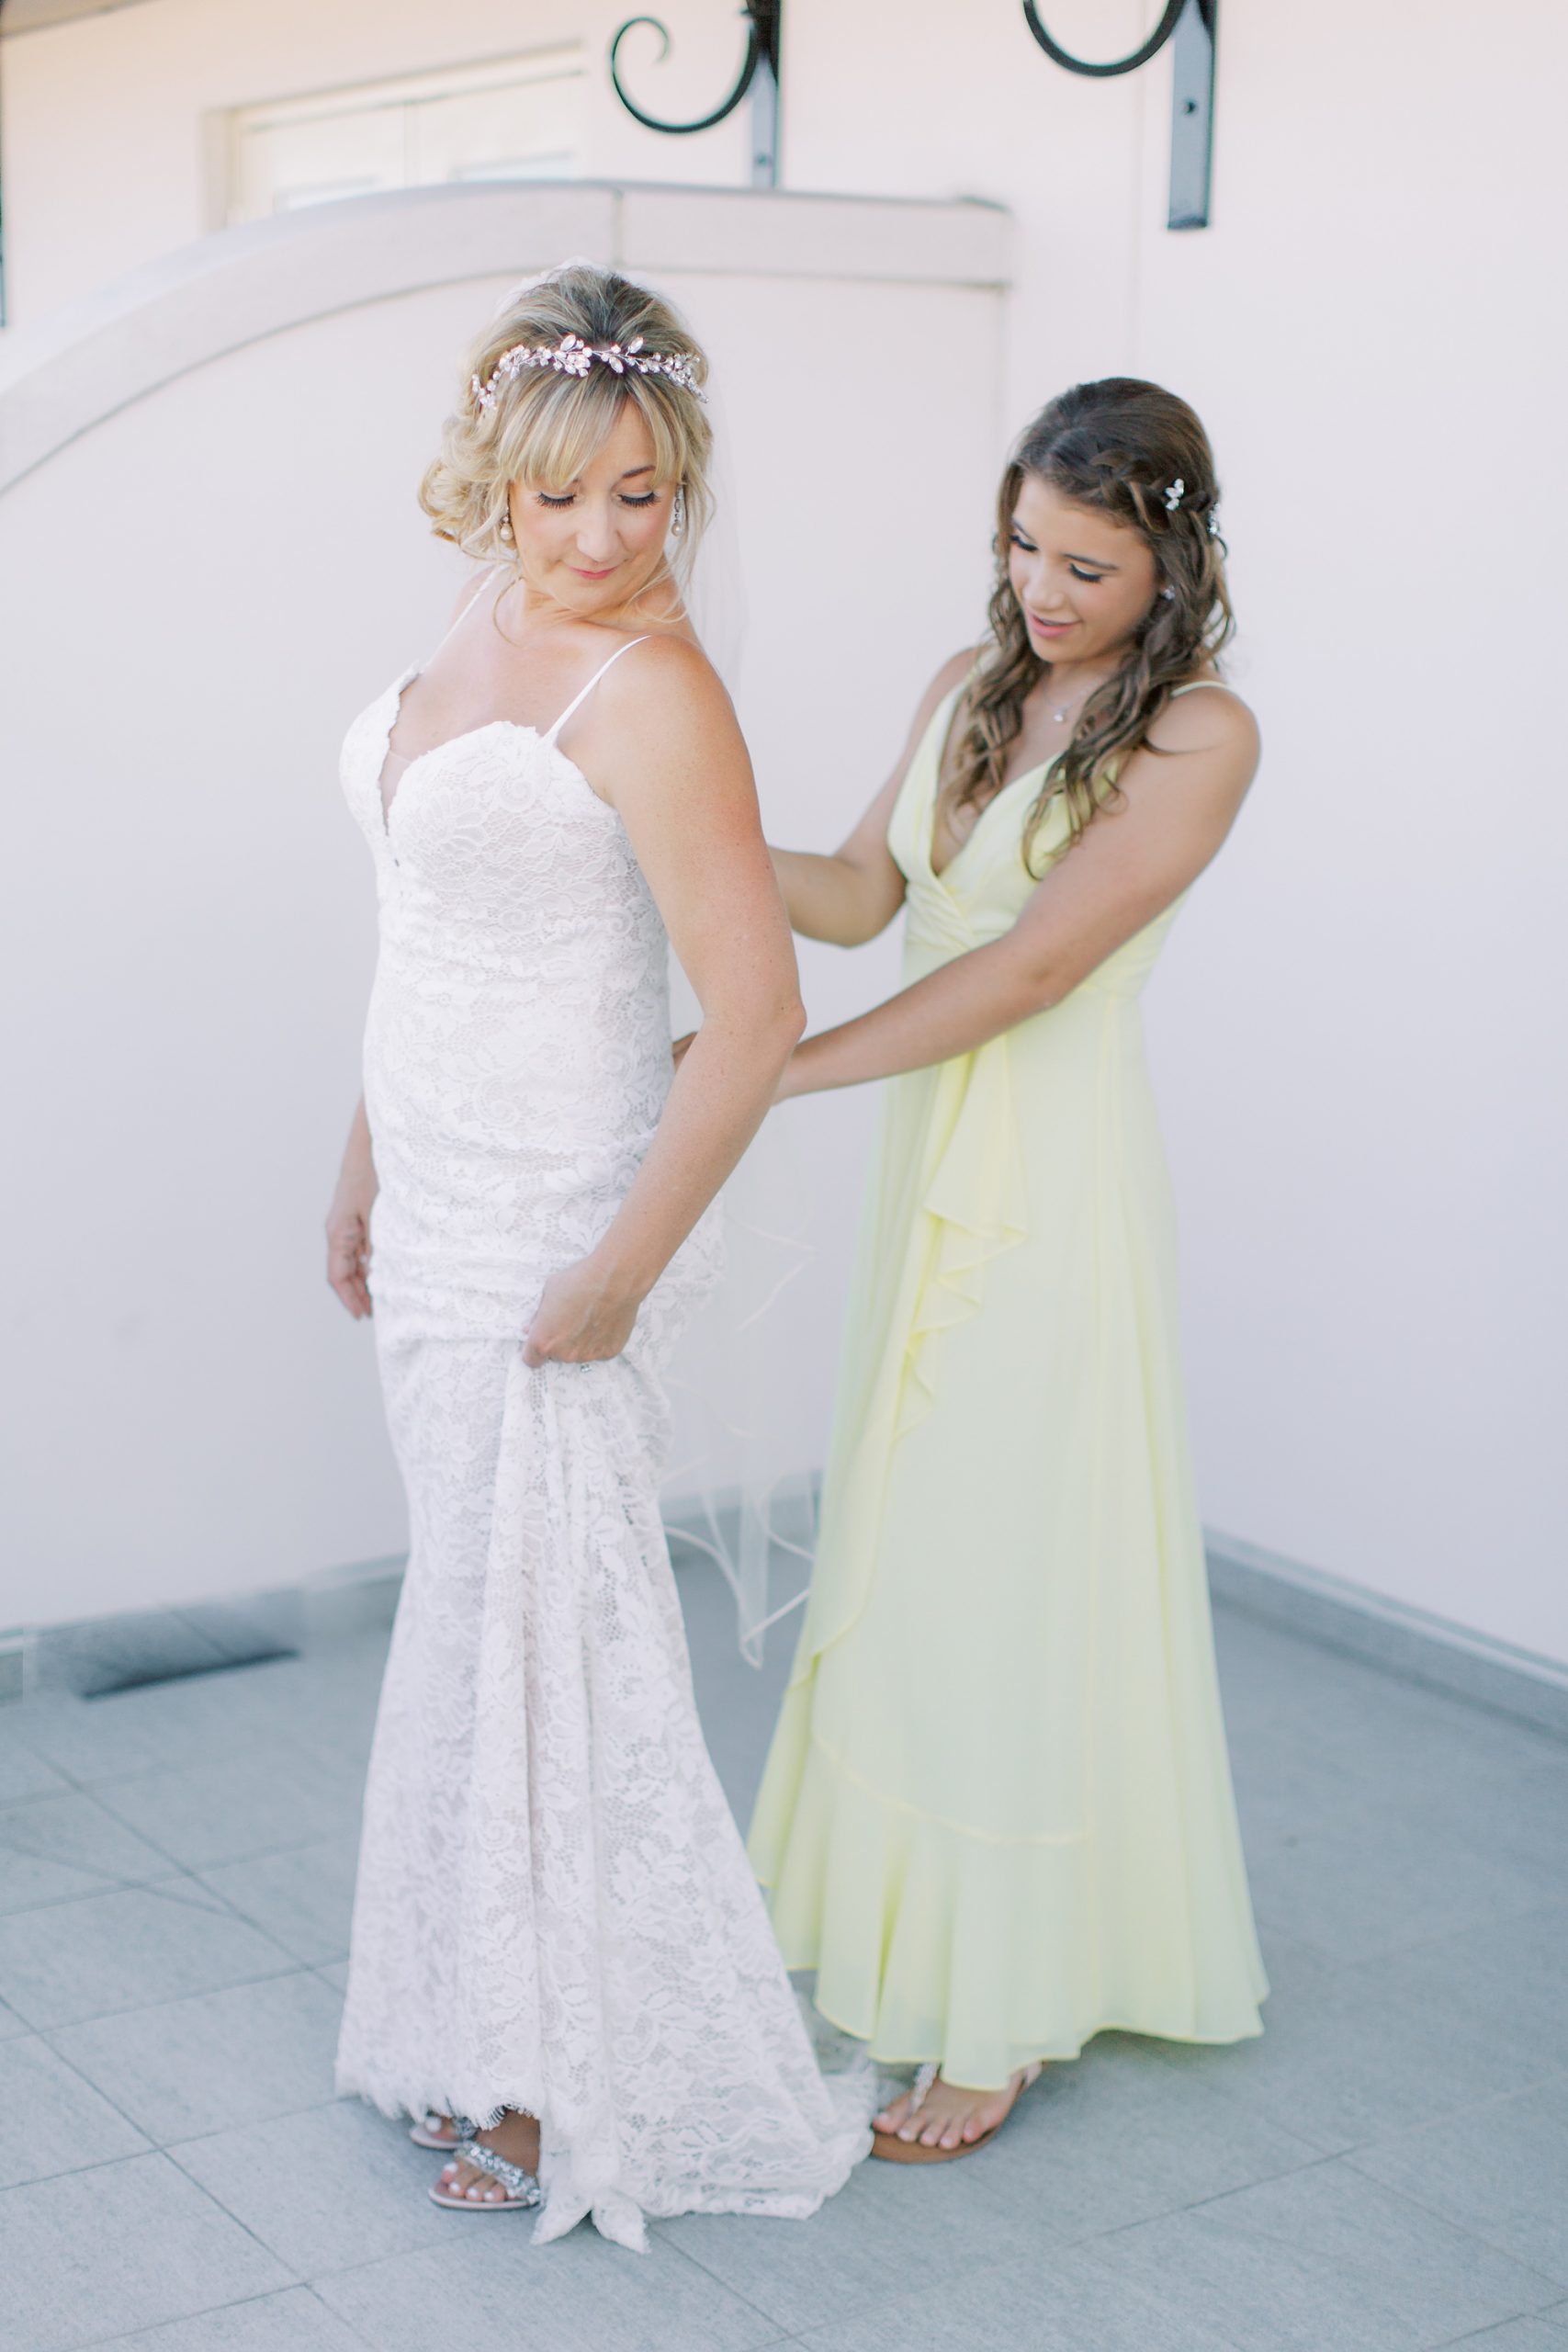 daughter in yellow gown helps mother into wedding dress